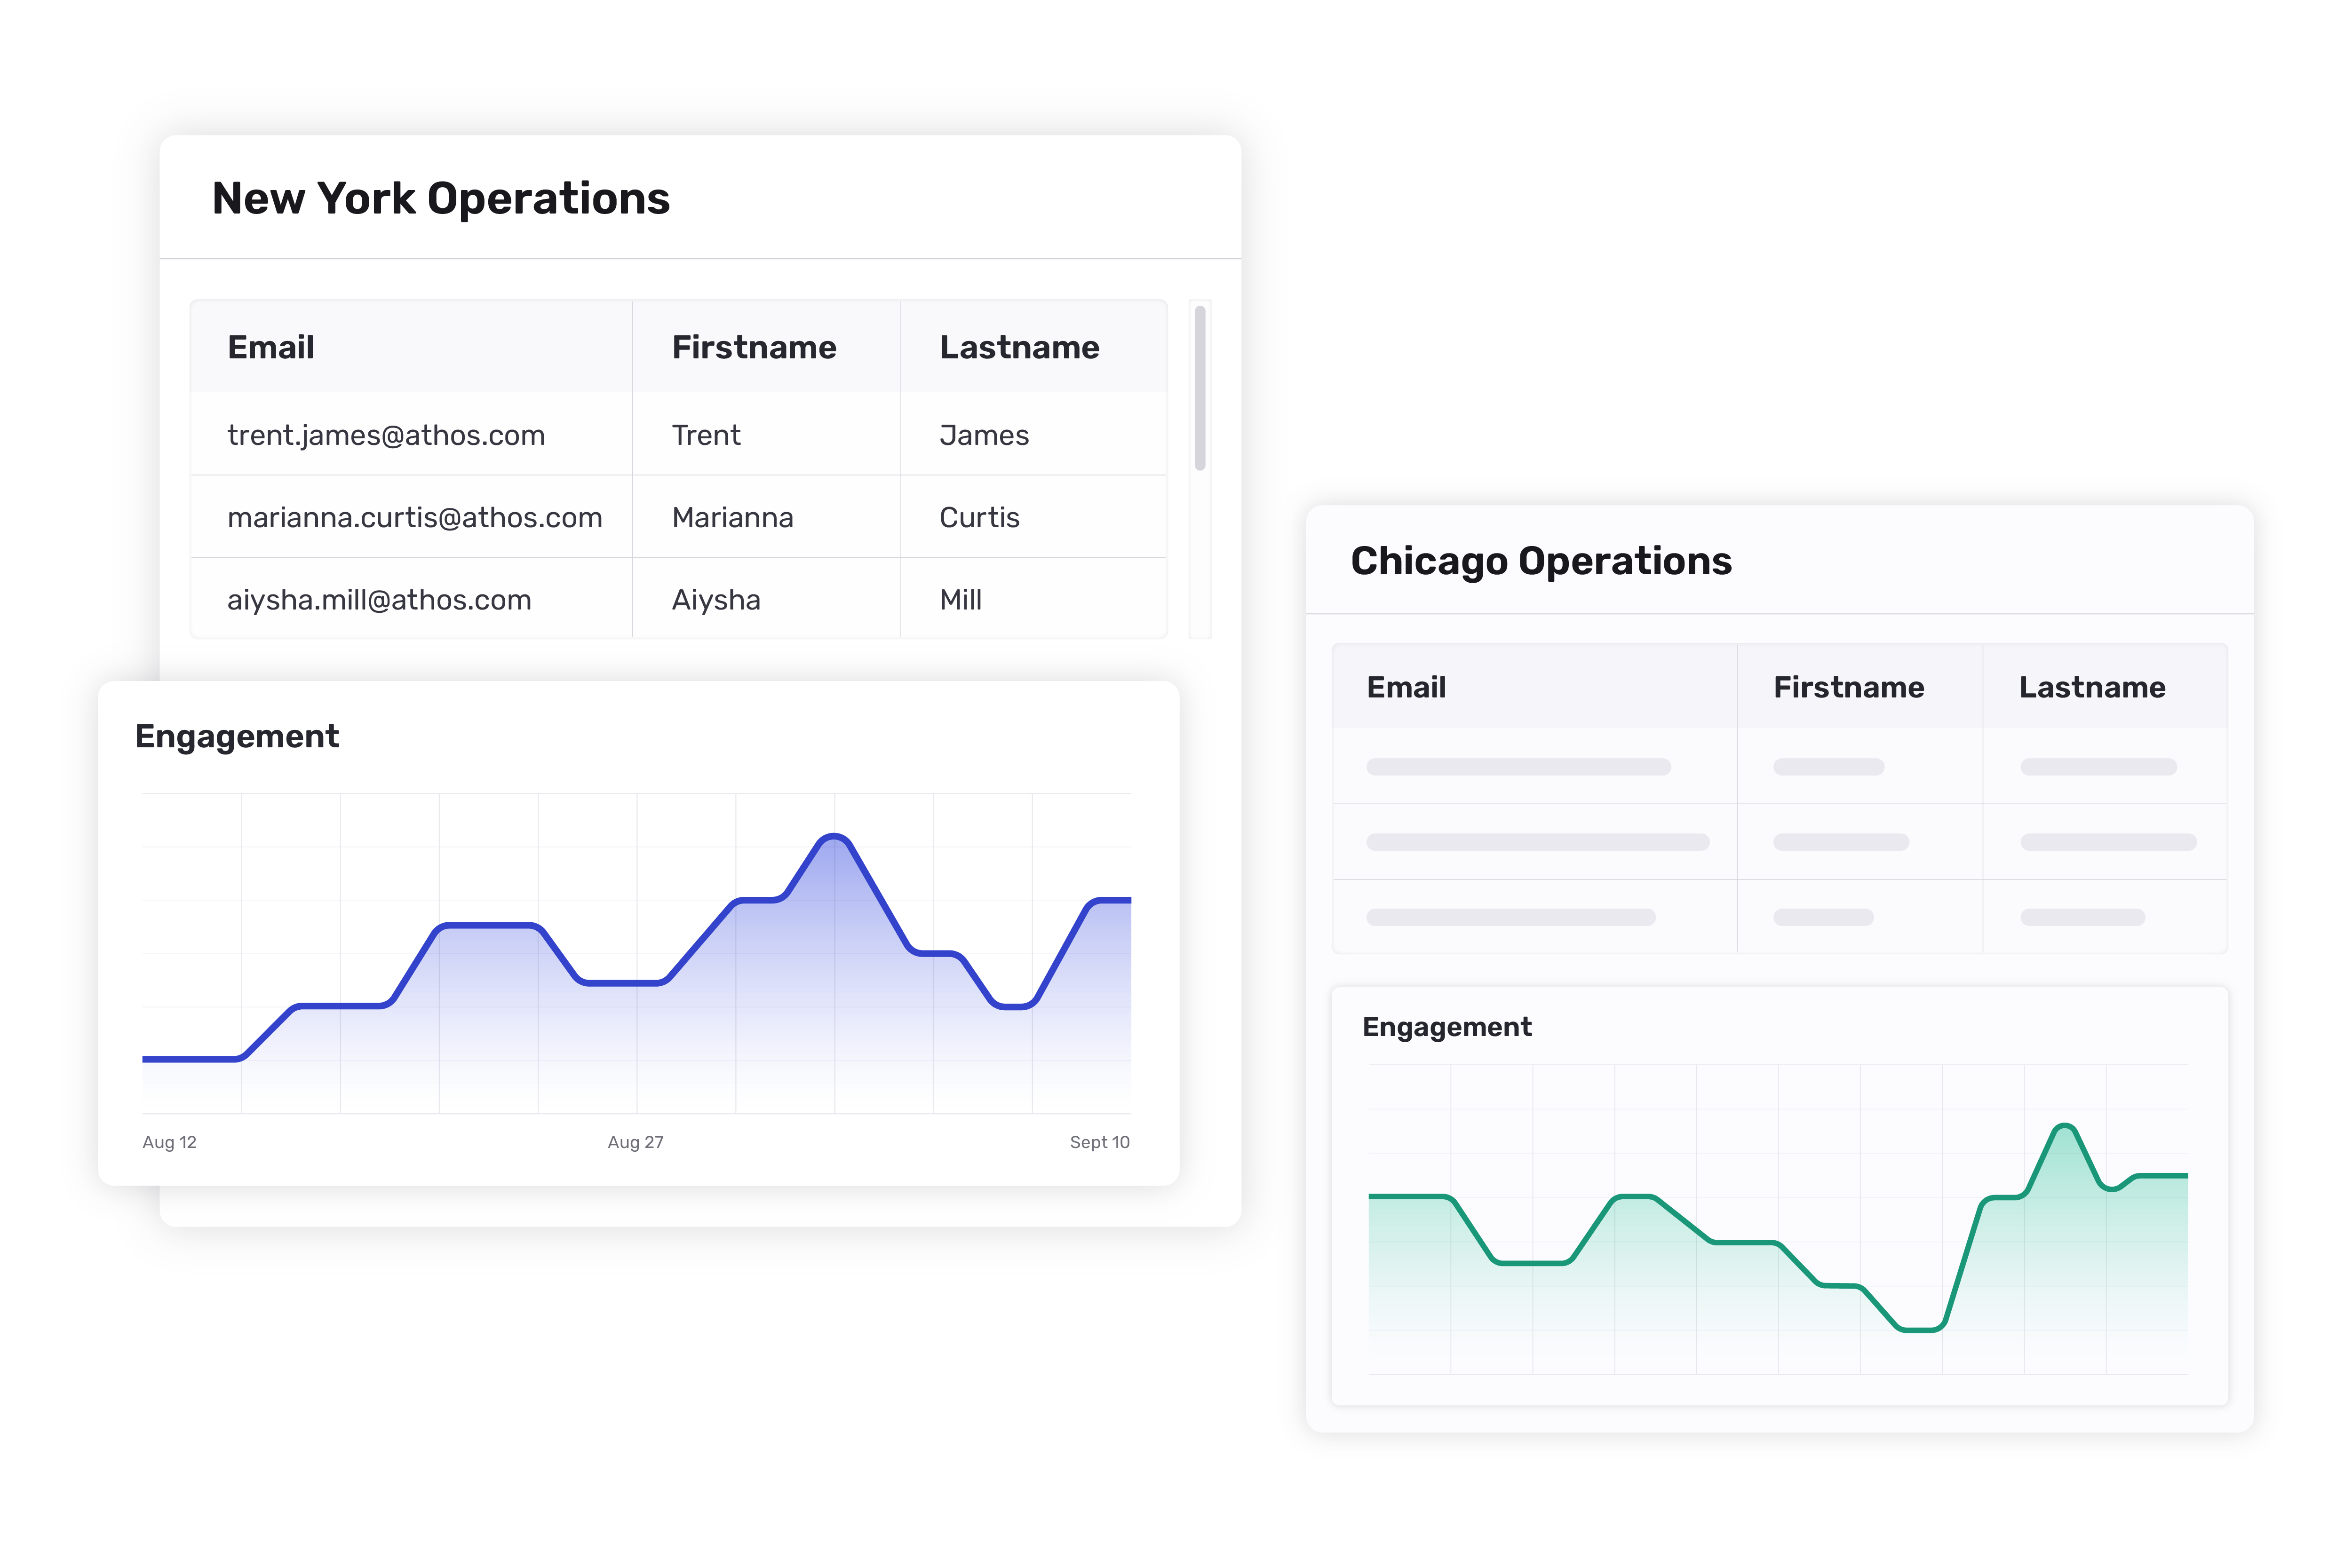 New York Operations and Chicago Operations distribution lists are being compared by levels of engagement